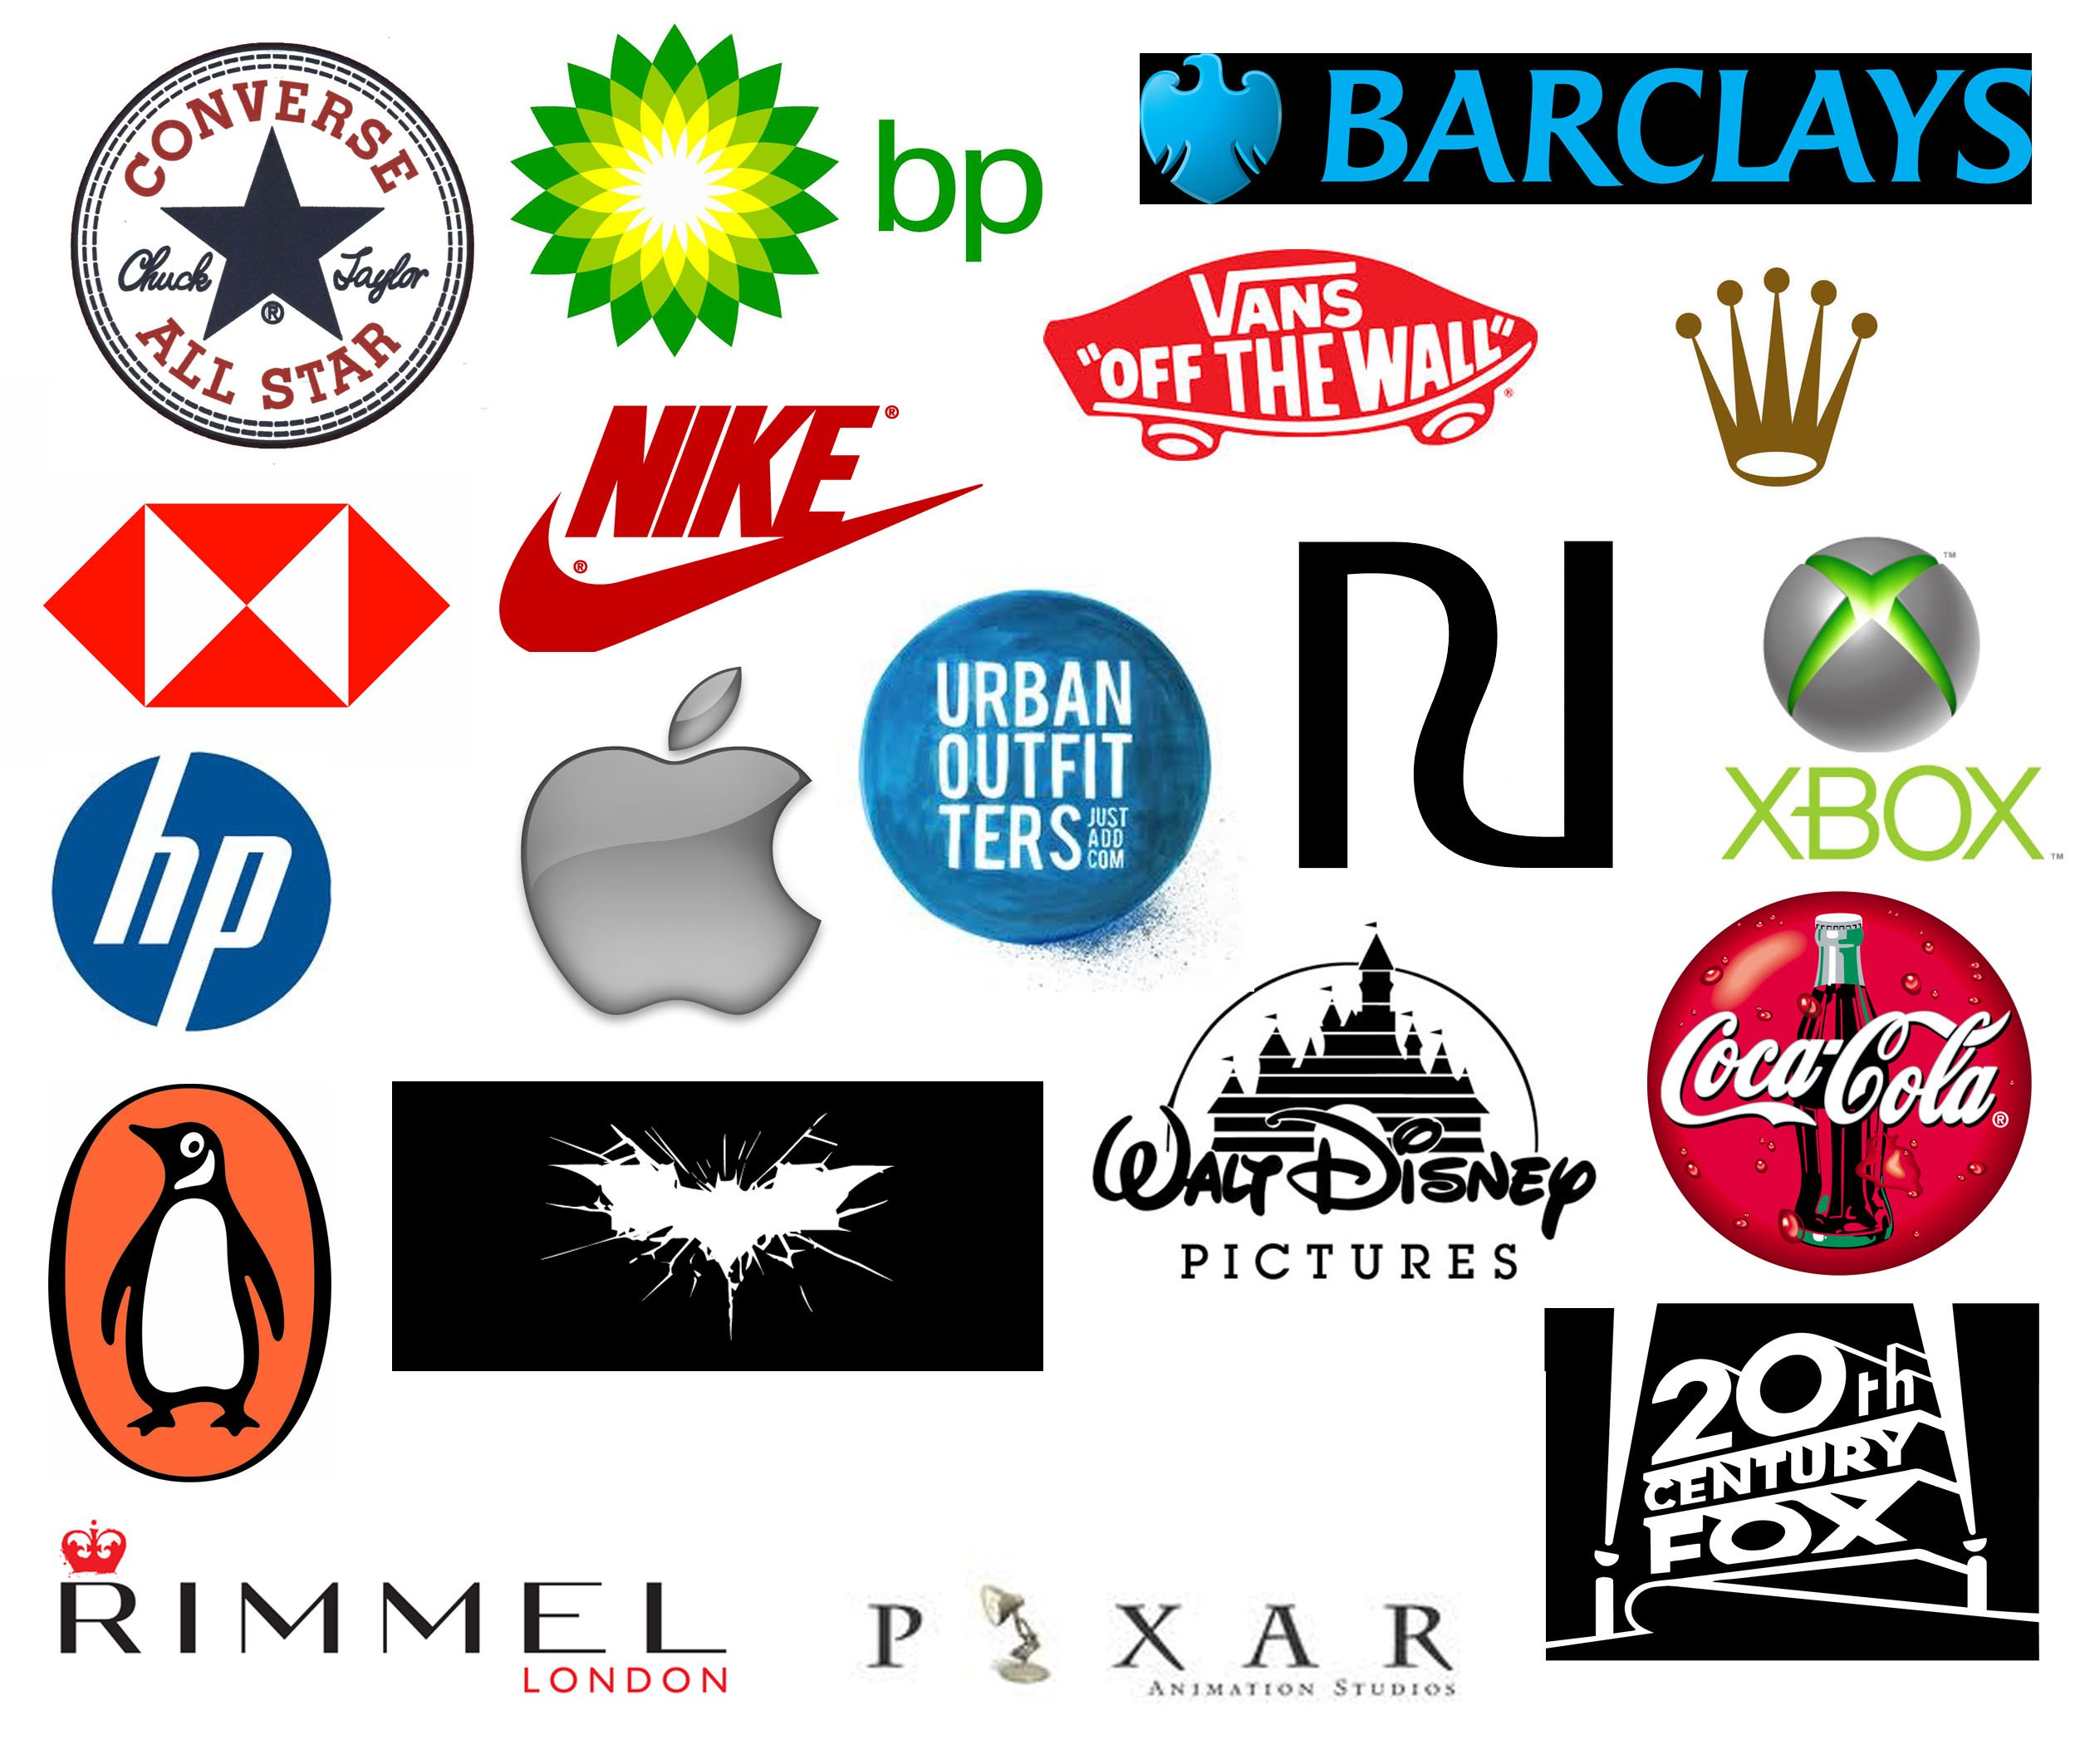 A collage of various well-known corporate logos. Each logo represents a distinctive brand with recognizable designs, such as the swoosh for Nike, the apple for Apple, and the Coca-Cola bottle.